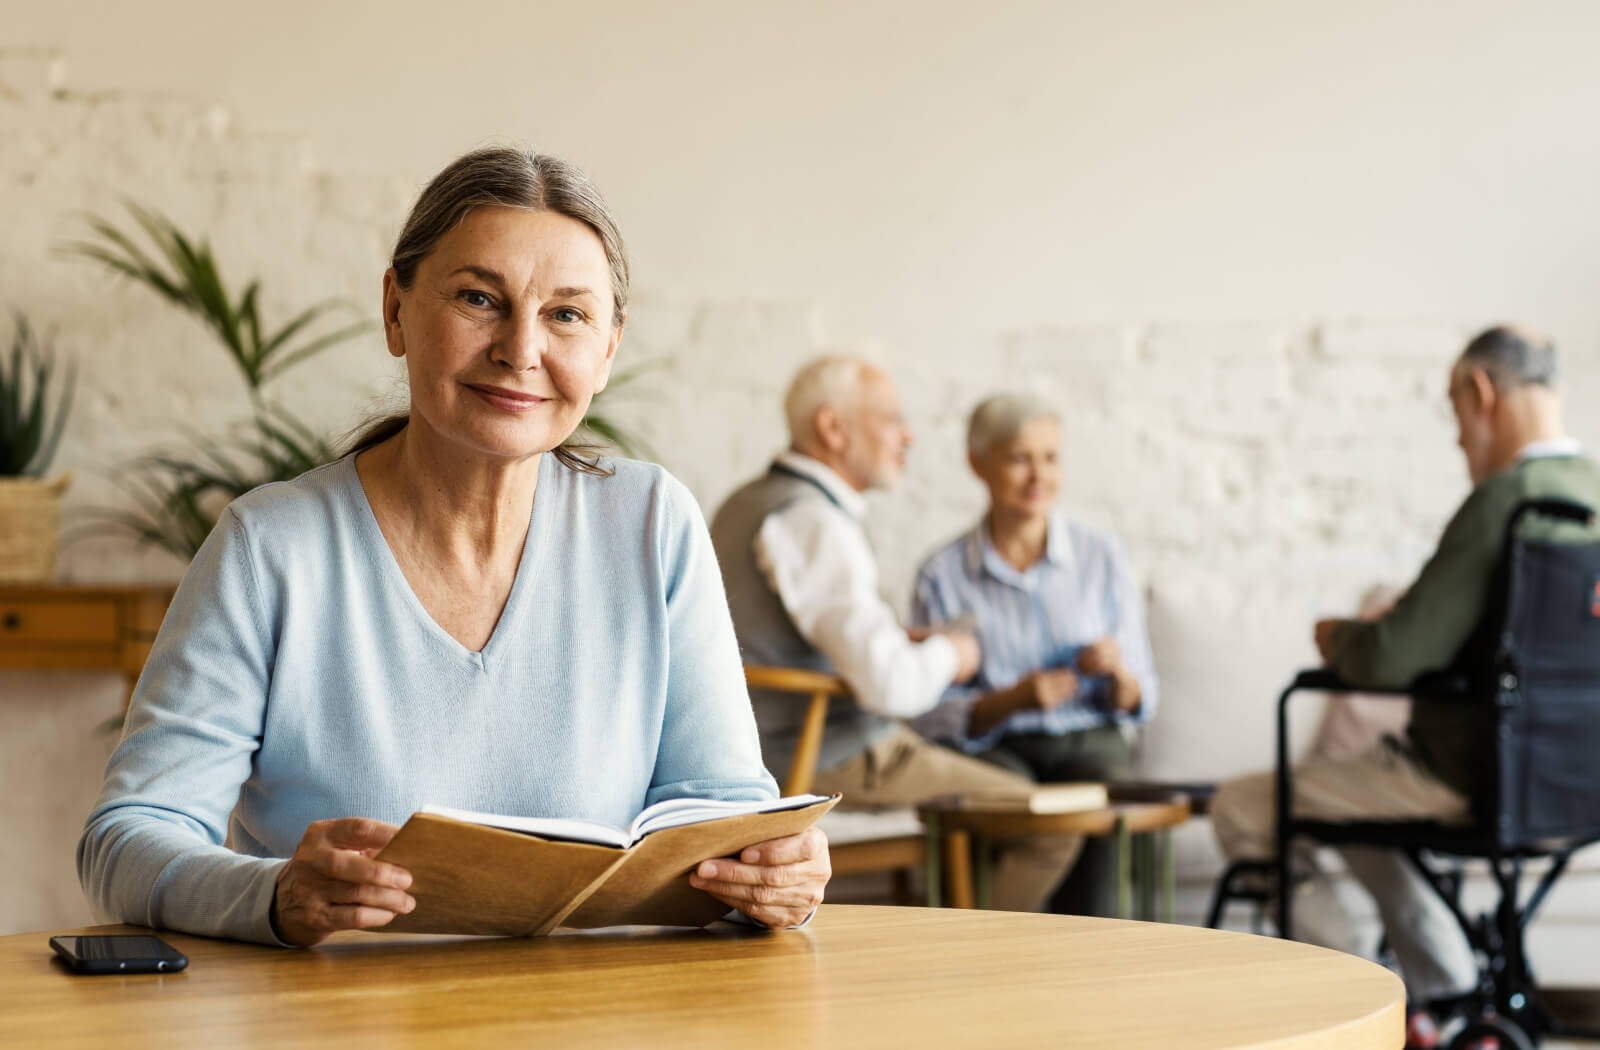 A senior woman smiling while sitting at a table holding a book with other seniors in the background.